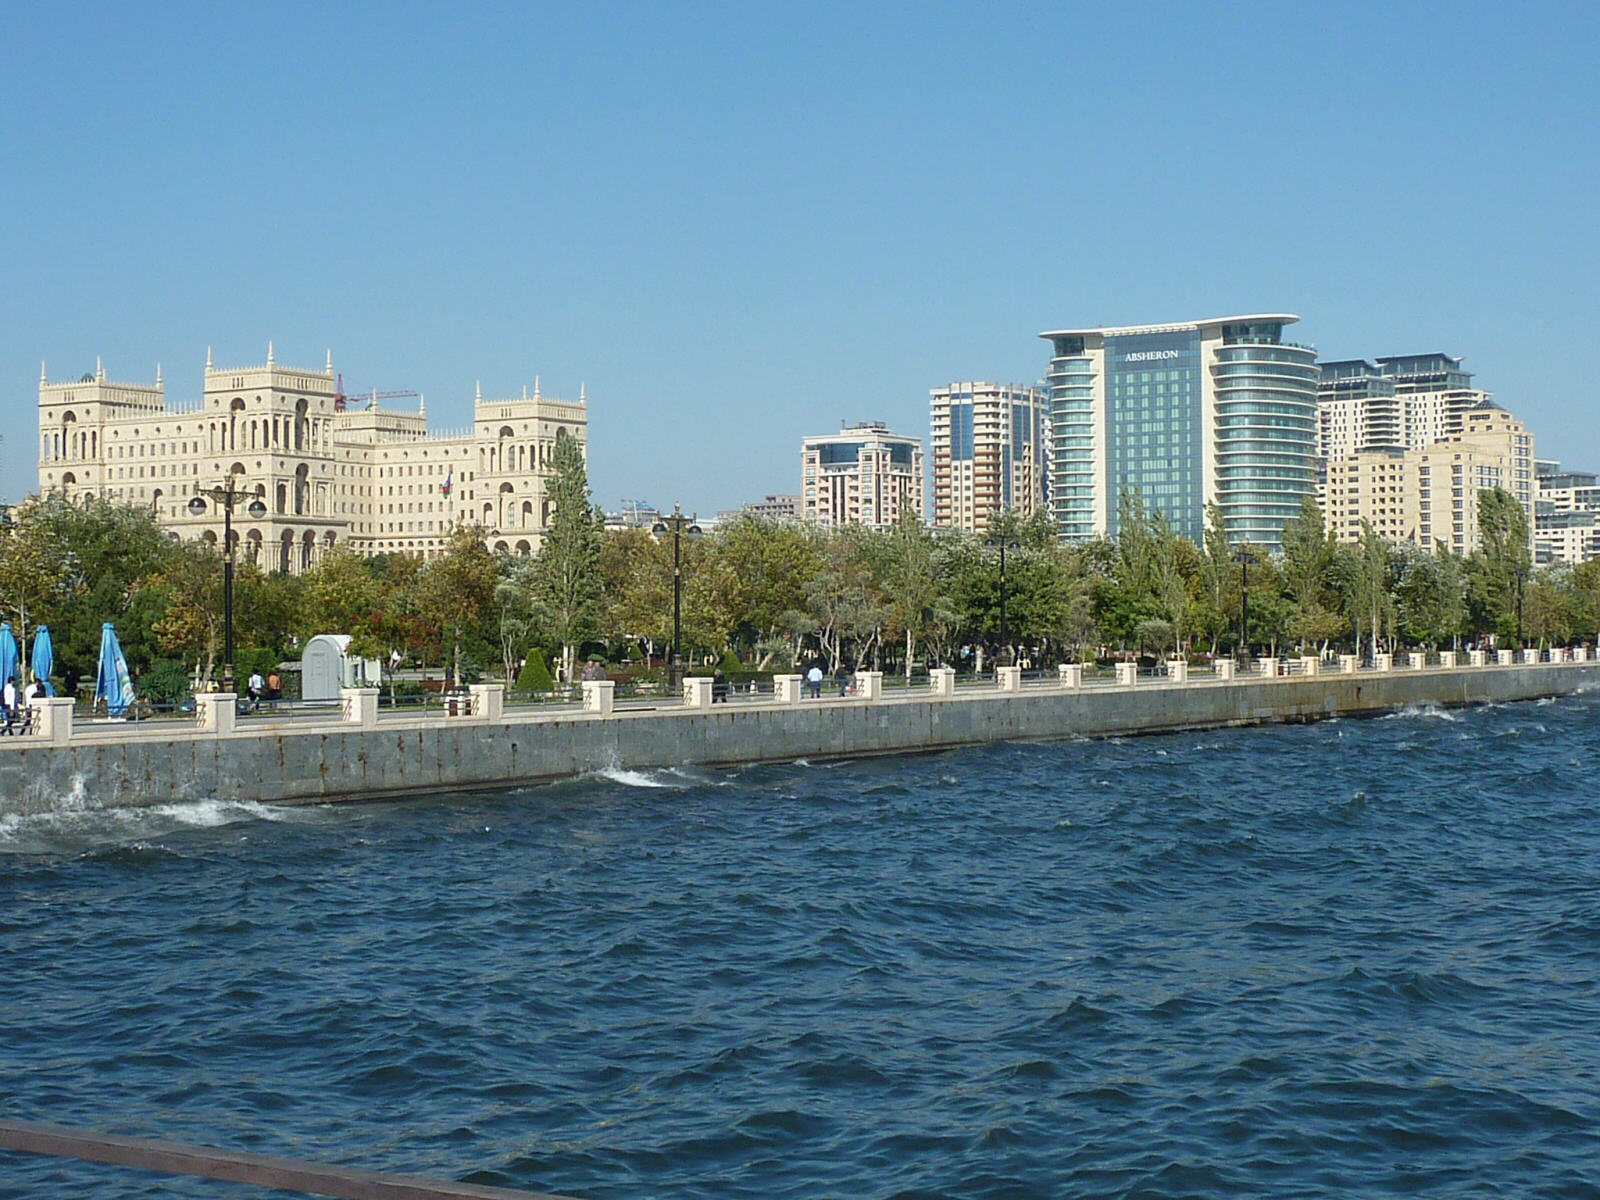 Government House and Absheron hotel on the Caspian seafront at Baku, Azerbaijan